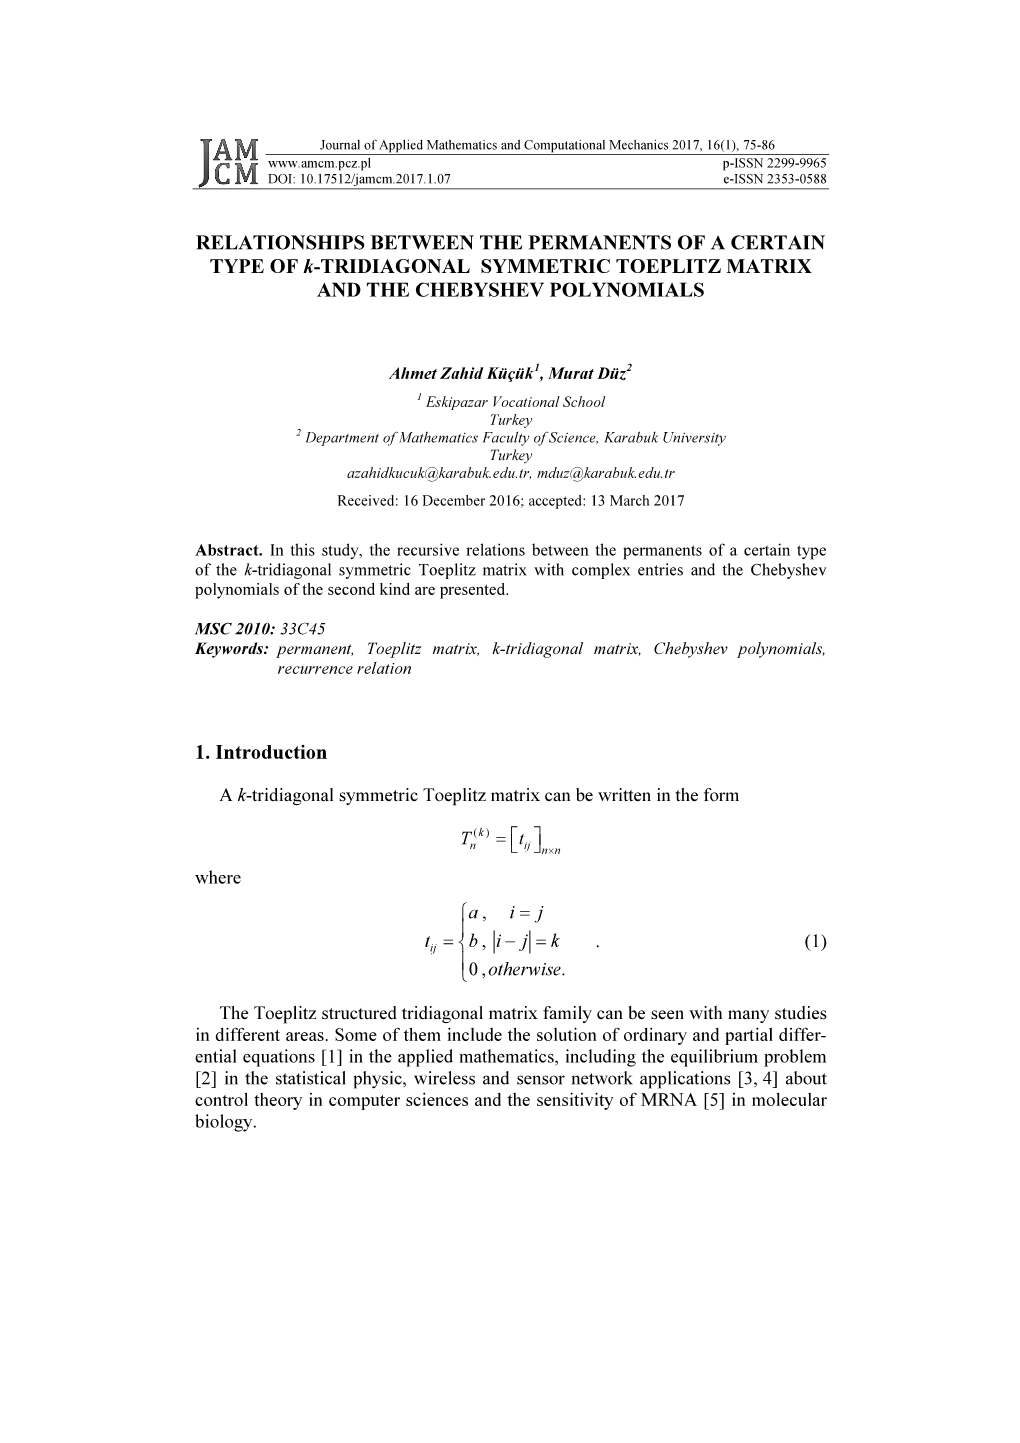 RELATIONSHIPS BETWEEN the PERMANENTS of a CERTAIN TYPE of K-TRIDIAGONAL SYMMETRIC TOEPLITZ MATRIX and the CHEBYSHEV POLYNOMIALS